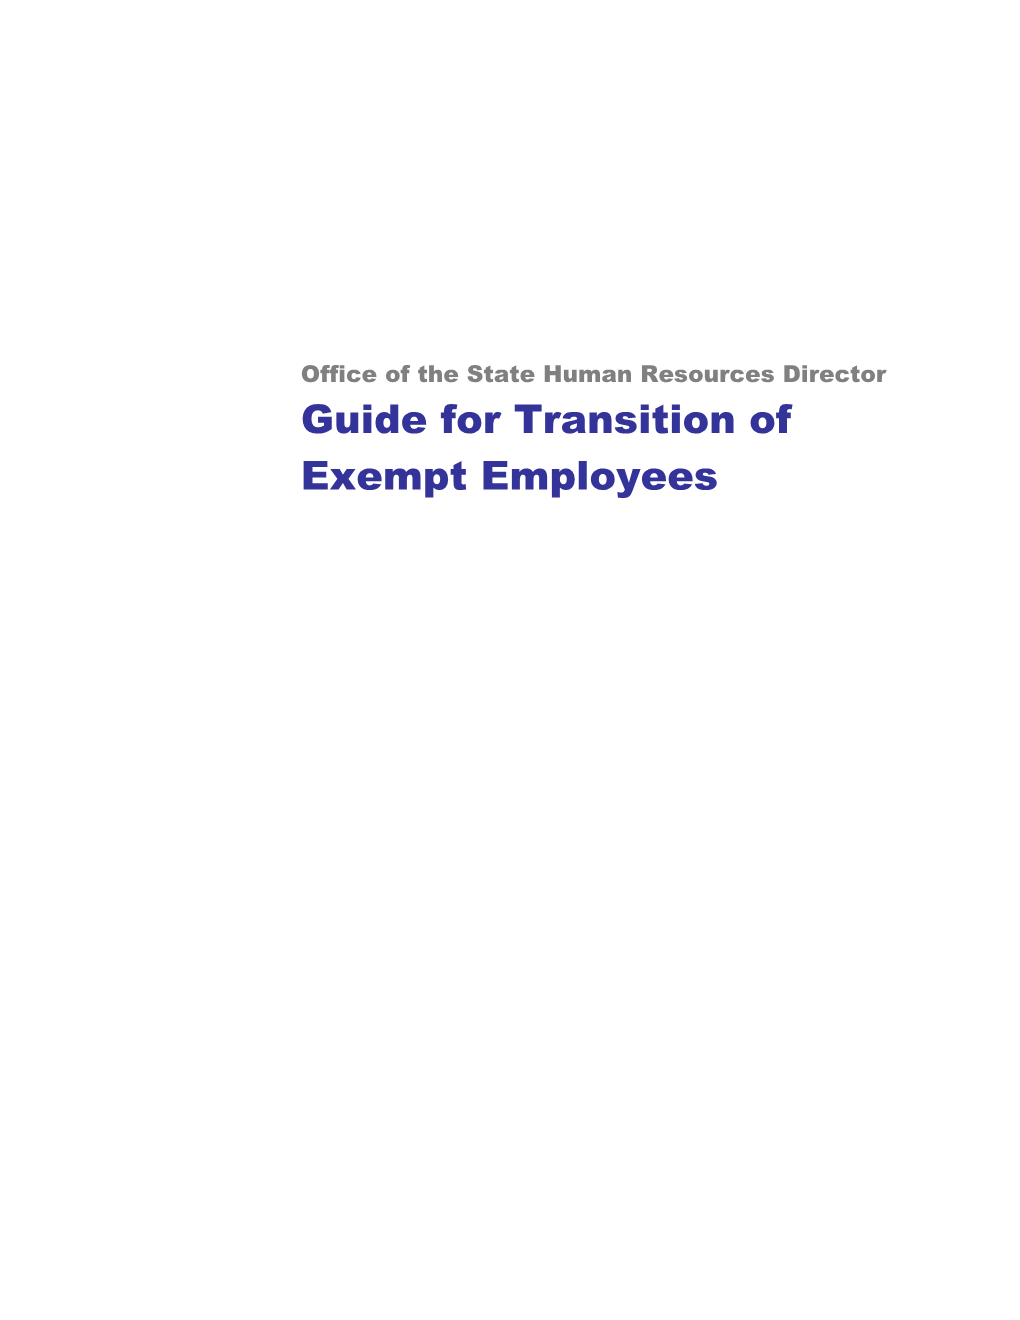 Transition Guide for Exempt Employees